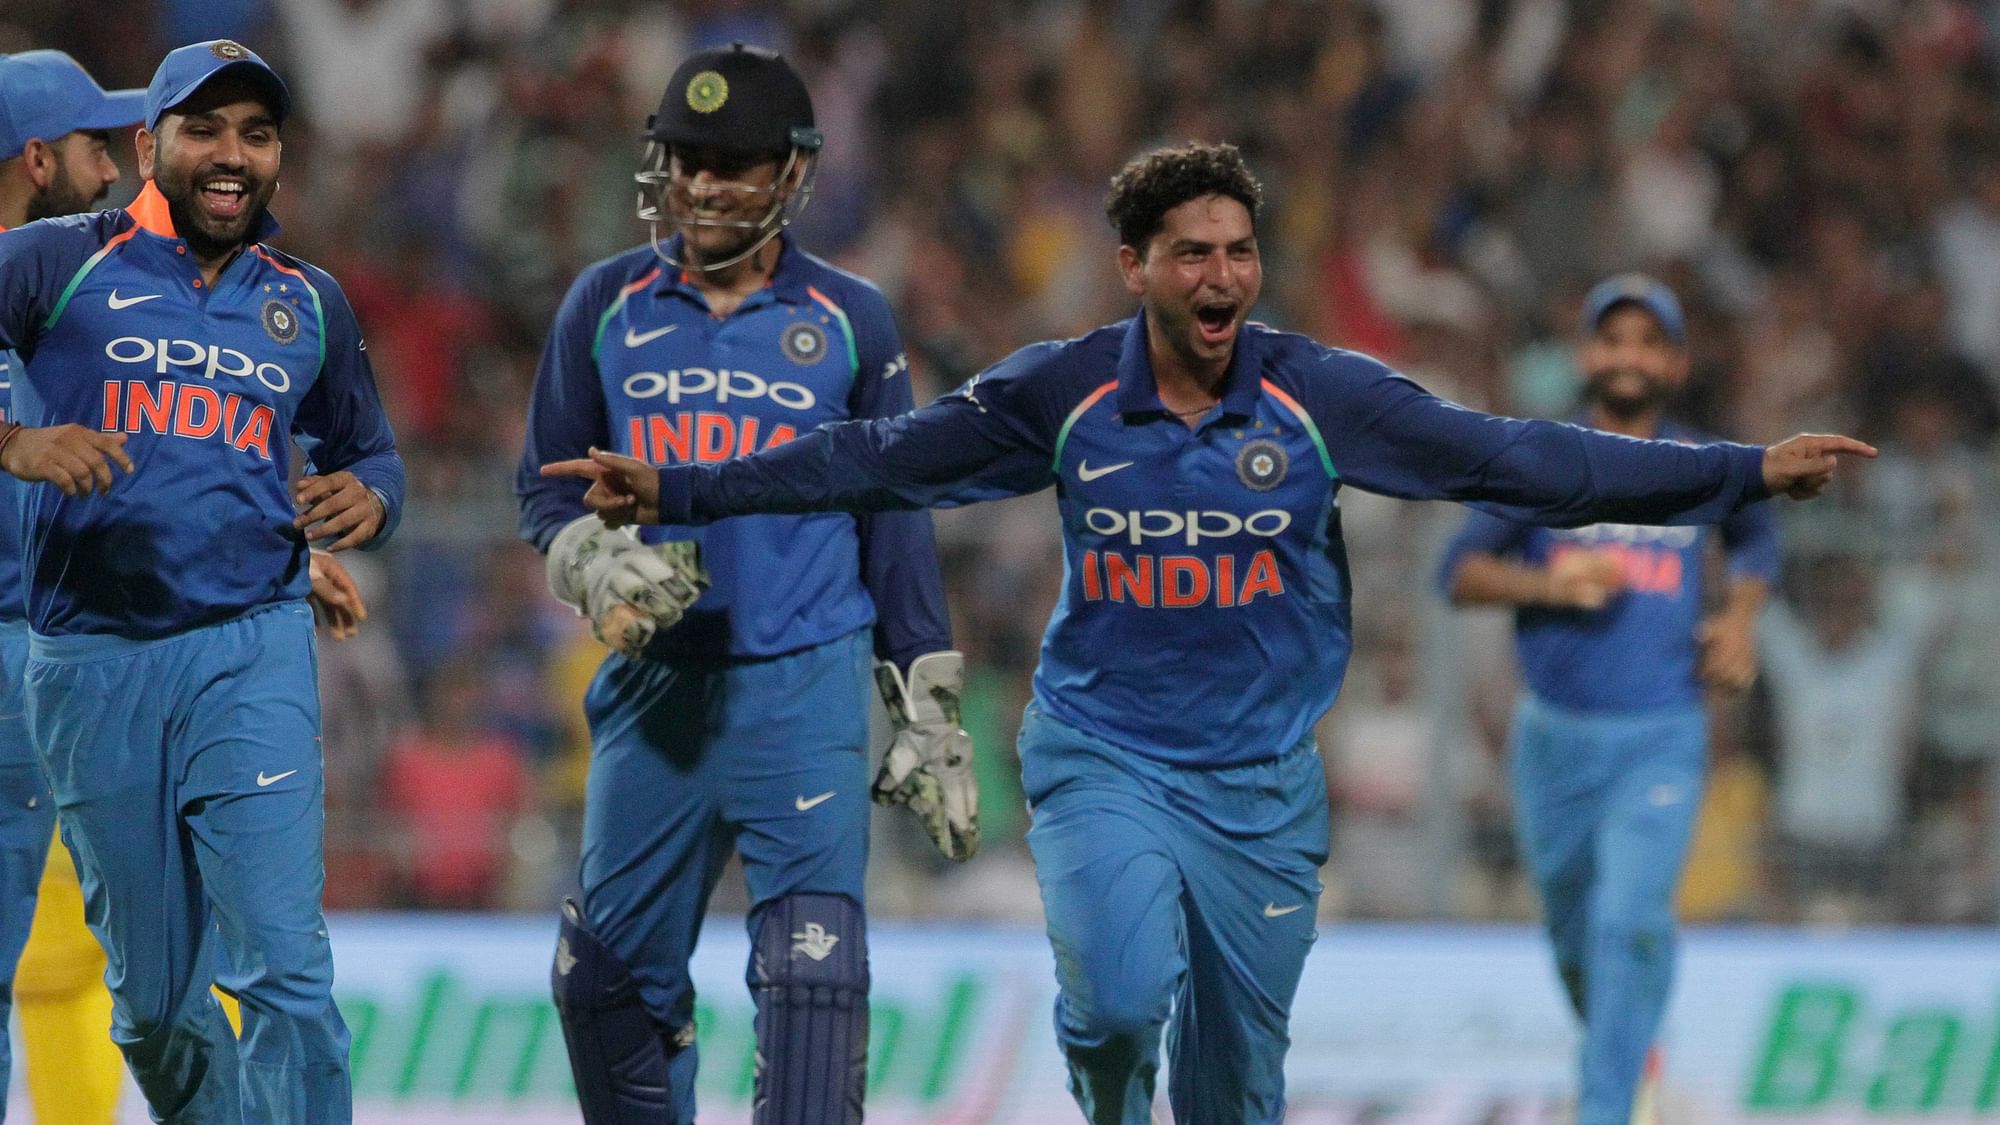 Kuldeep Yadav become only the third-ever Indian cricketer to take an ODI hat-trick.